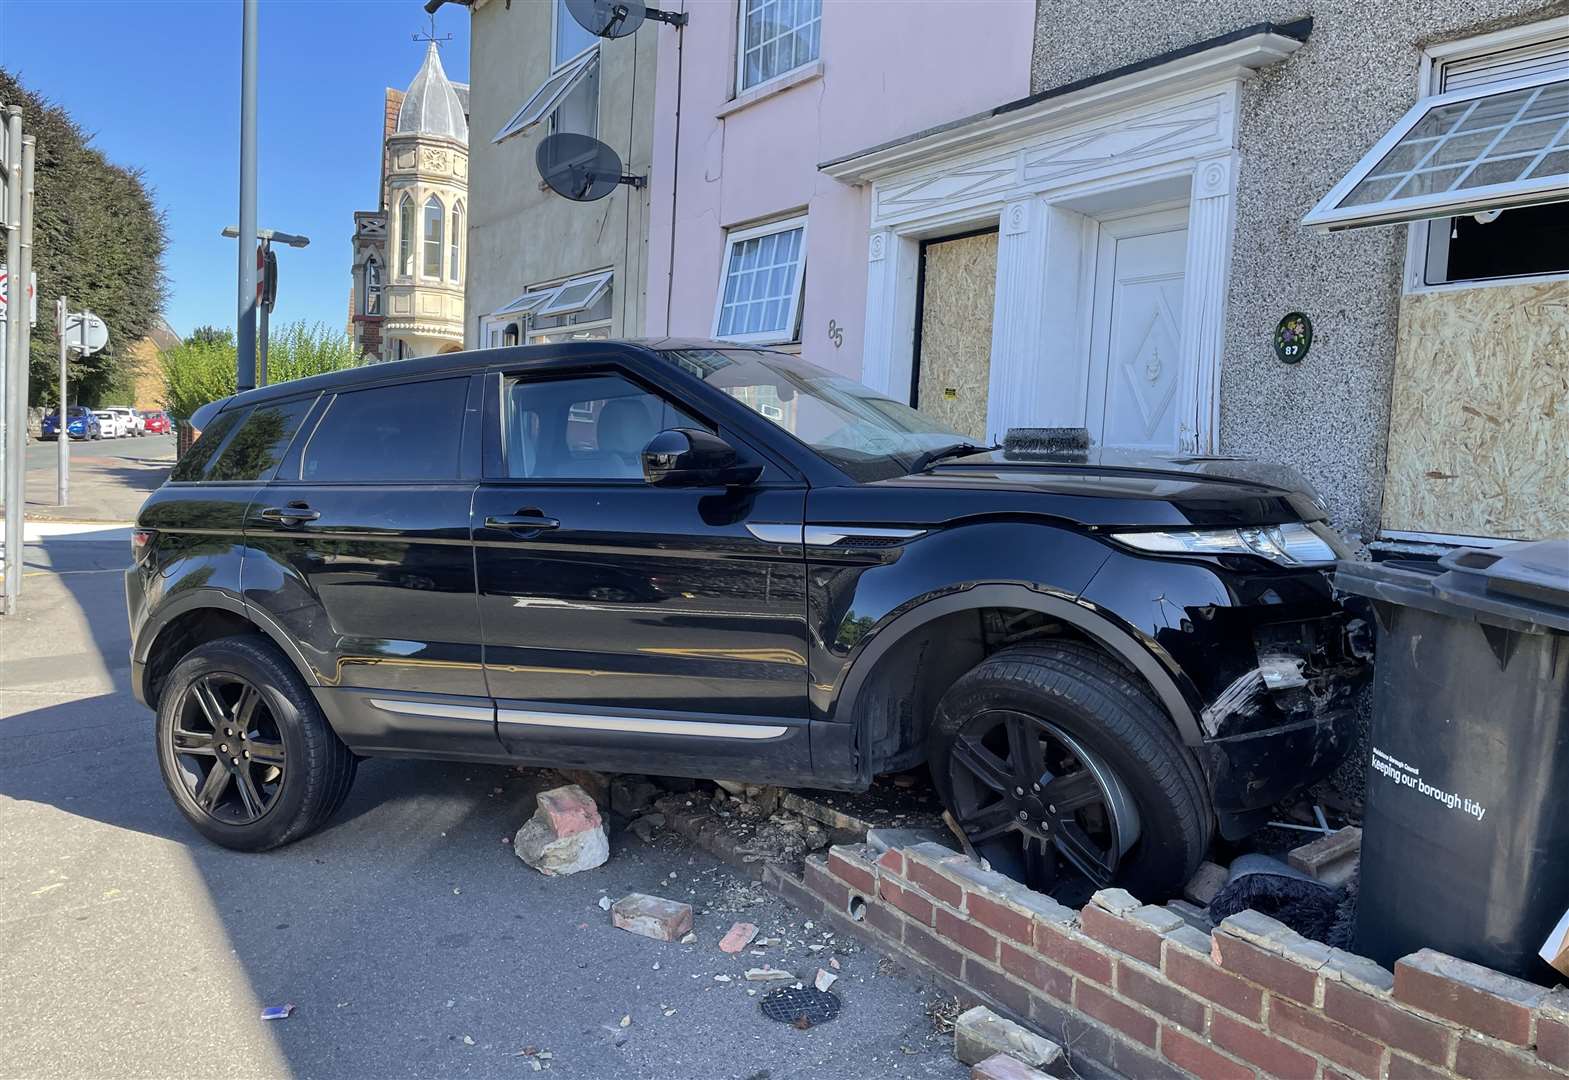 Suspected drink driver ploughs into homes